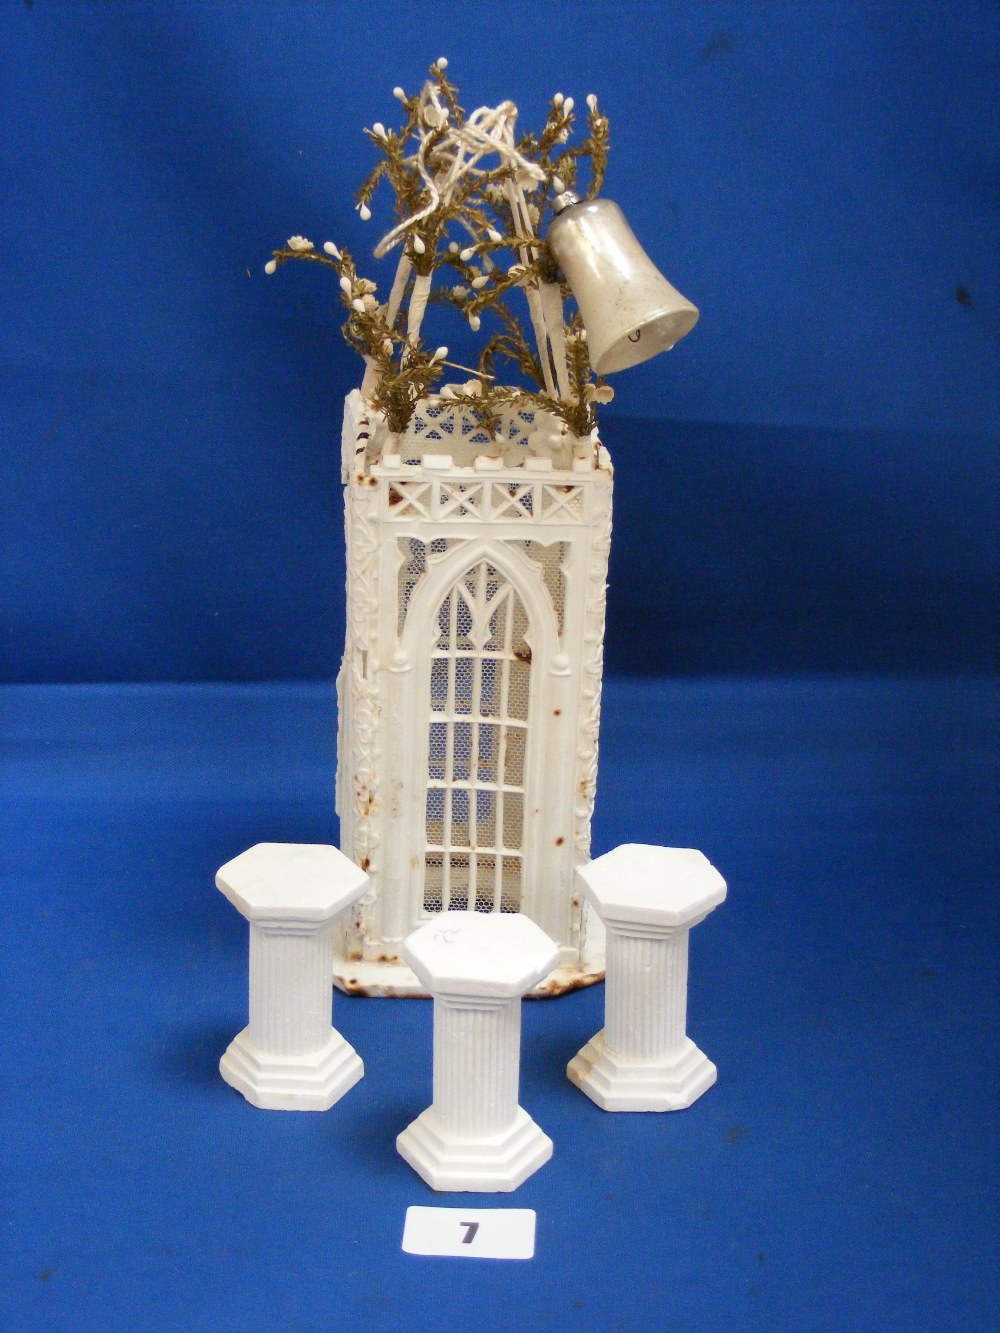 A Victorian cake decoration made in icing sugar and depicting a gazebo.